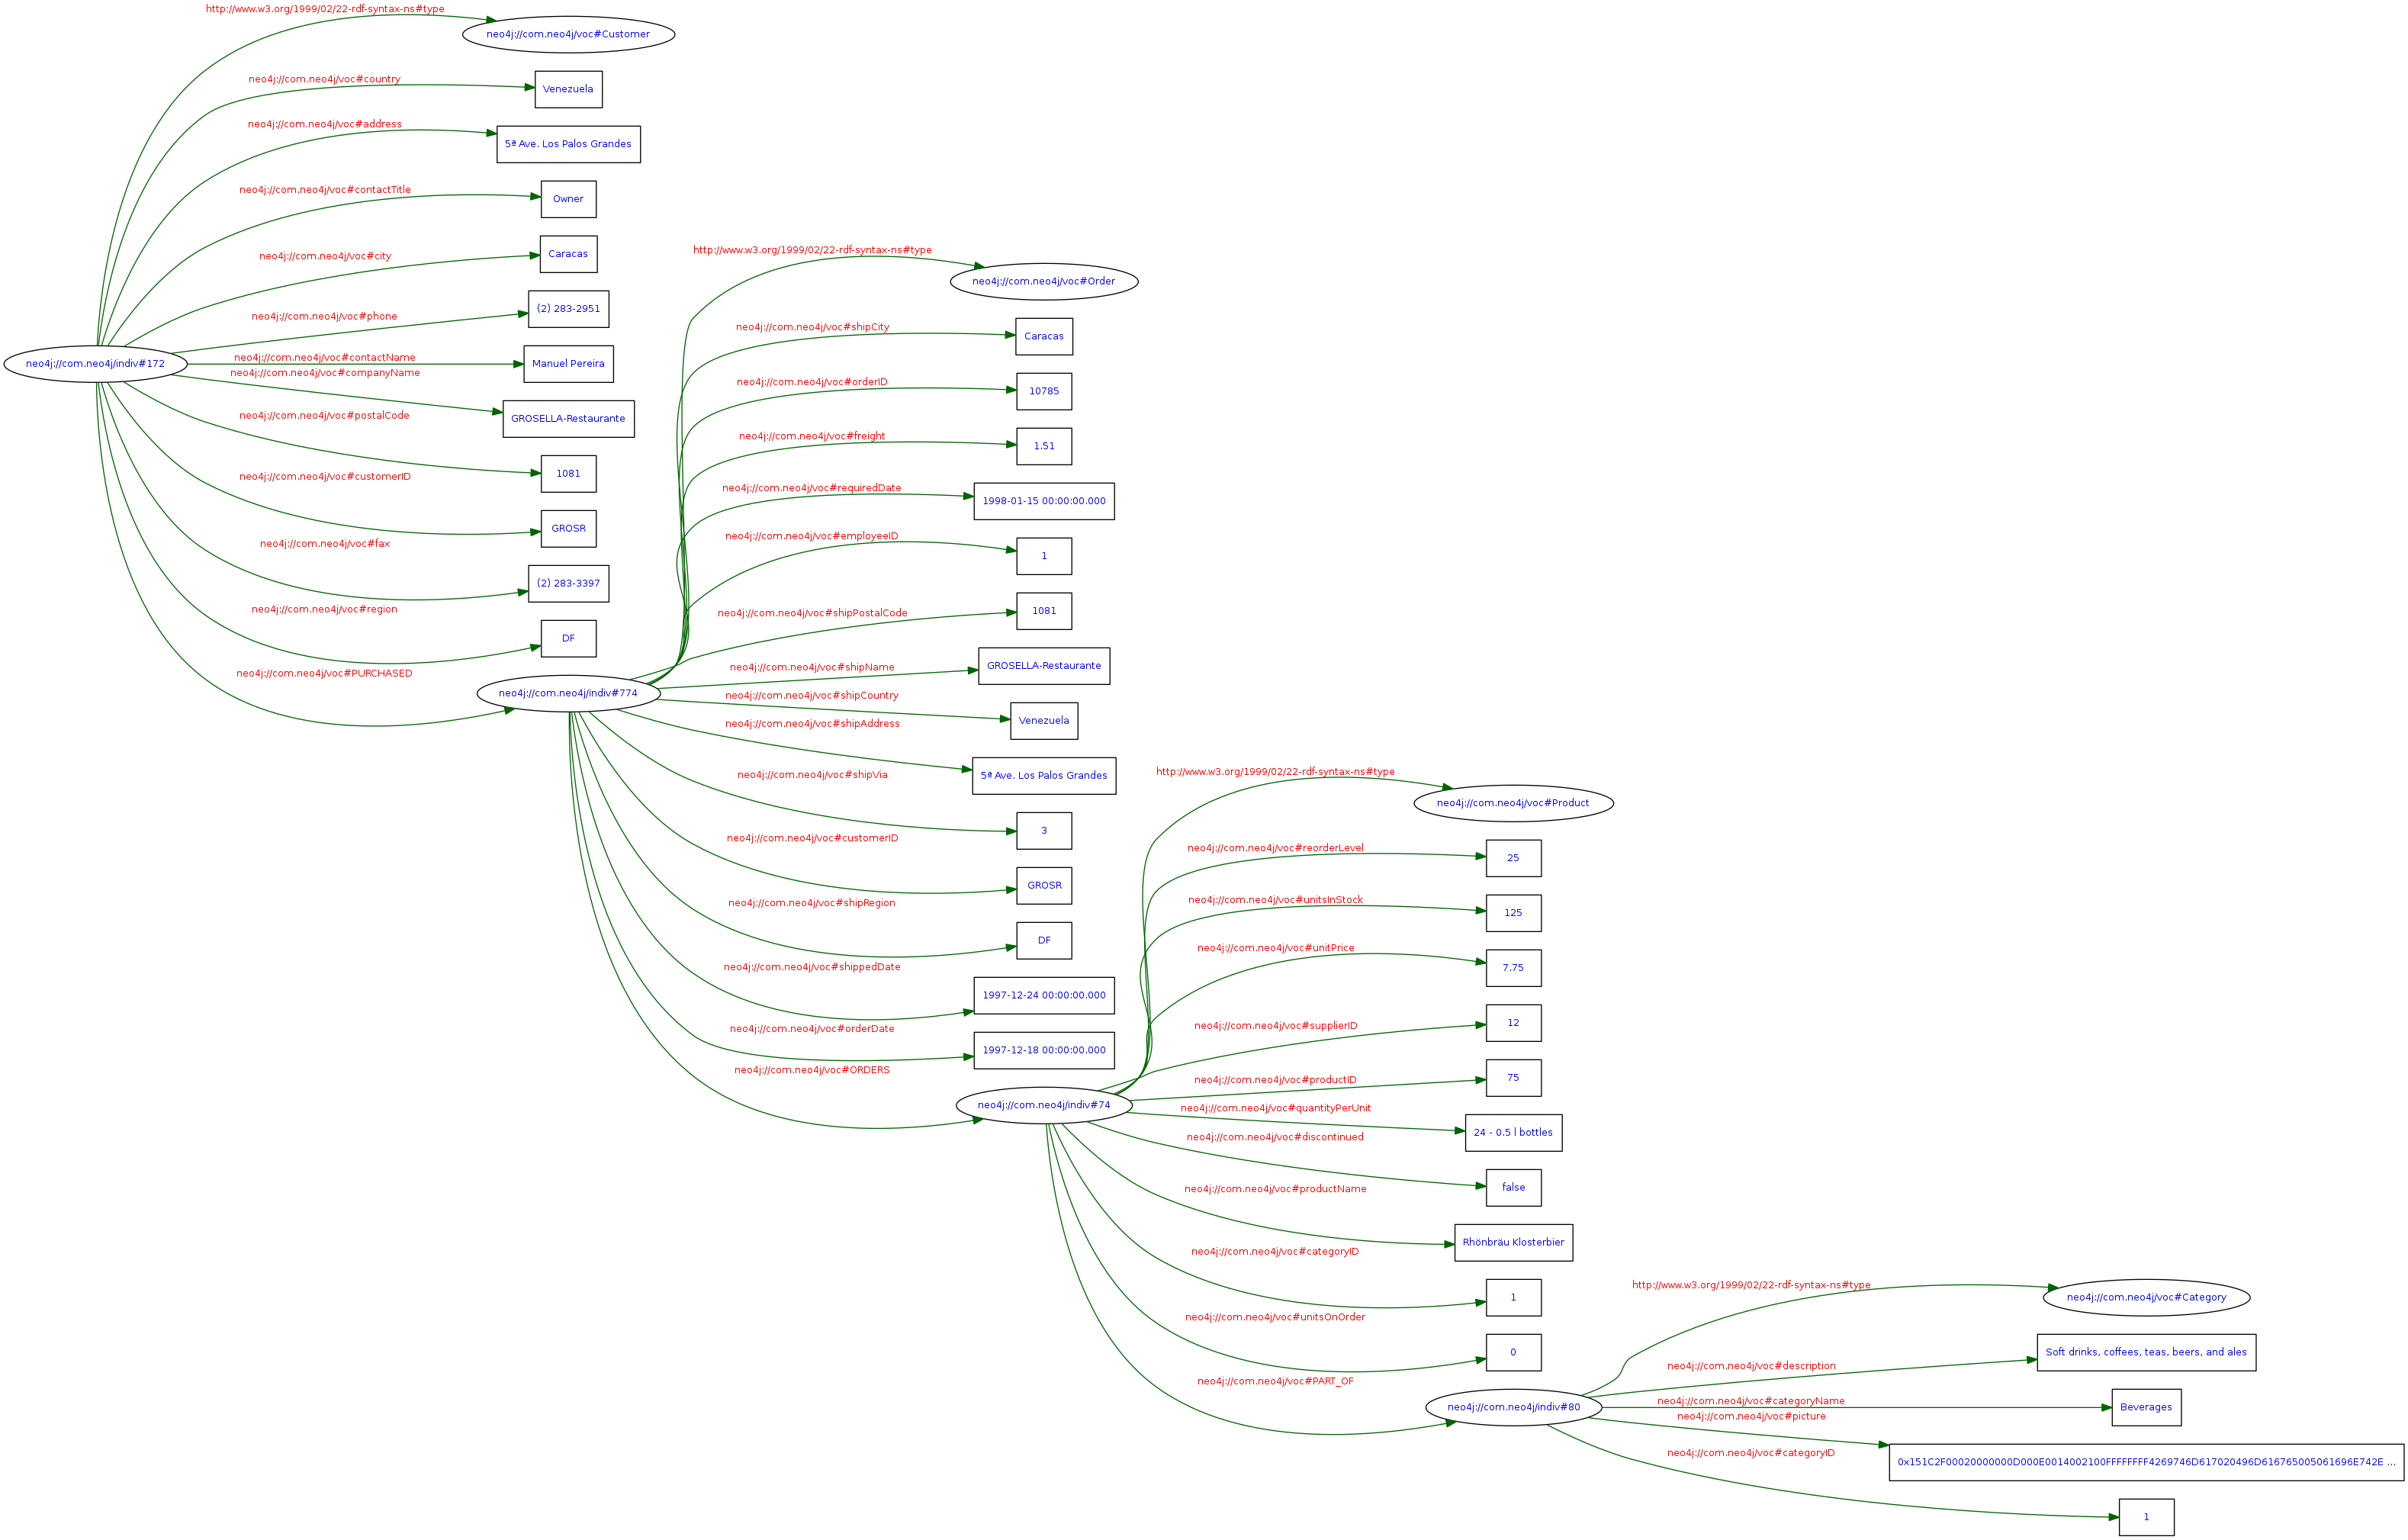 RDF Graph visualisation generated by W3C RDF Validation service